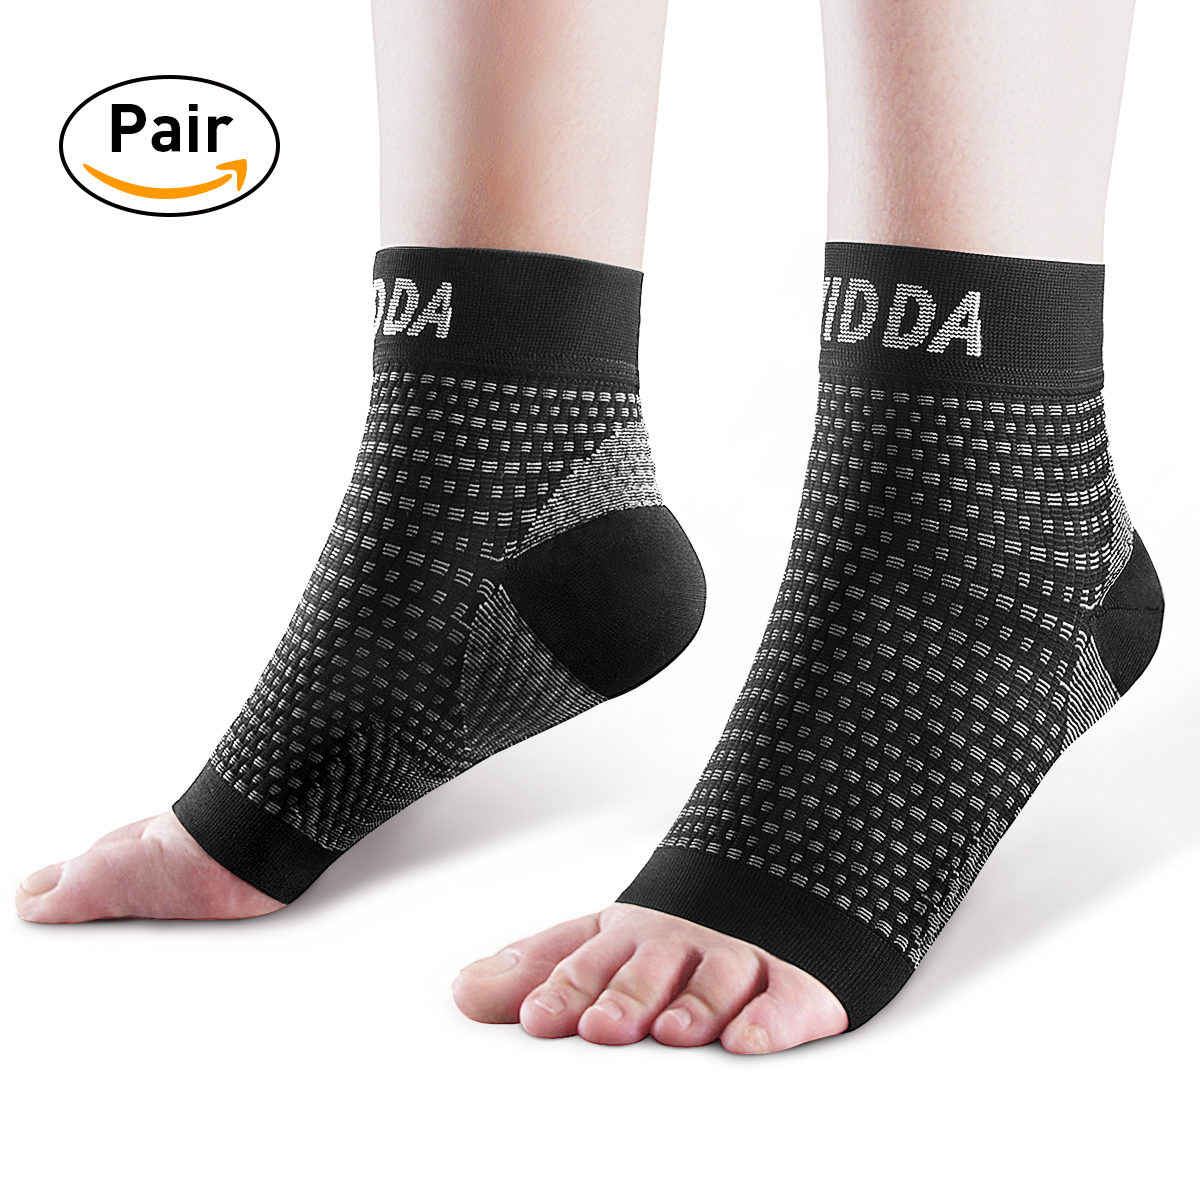 Ankle Brace for Men Women Pair AVIDDA Plantar Fasciitis Socks with Arch Support Compression Ankle Support Foot Sleeve for Achilles Tendon Support Swelling Eases Heel Pain Relief Black Small 